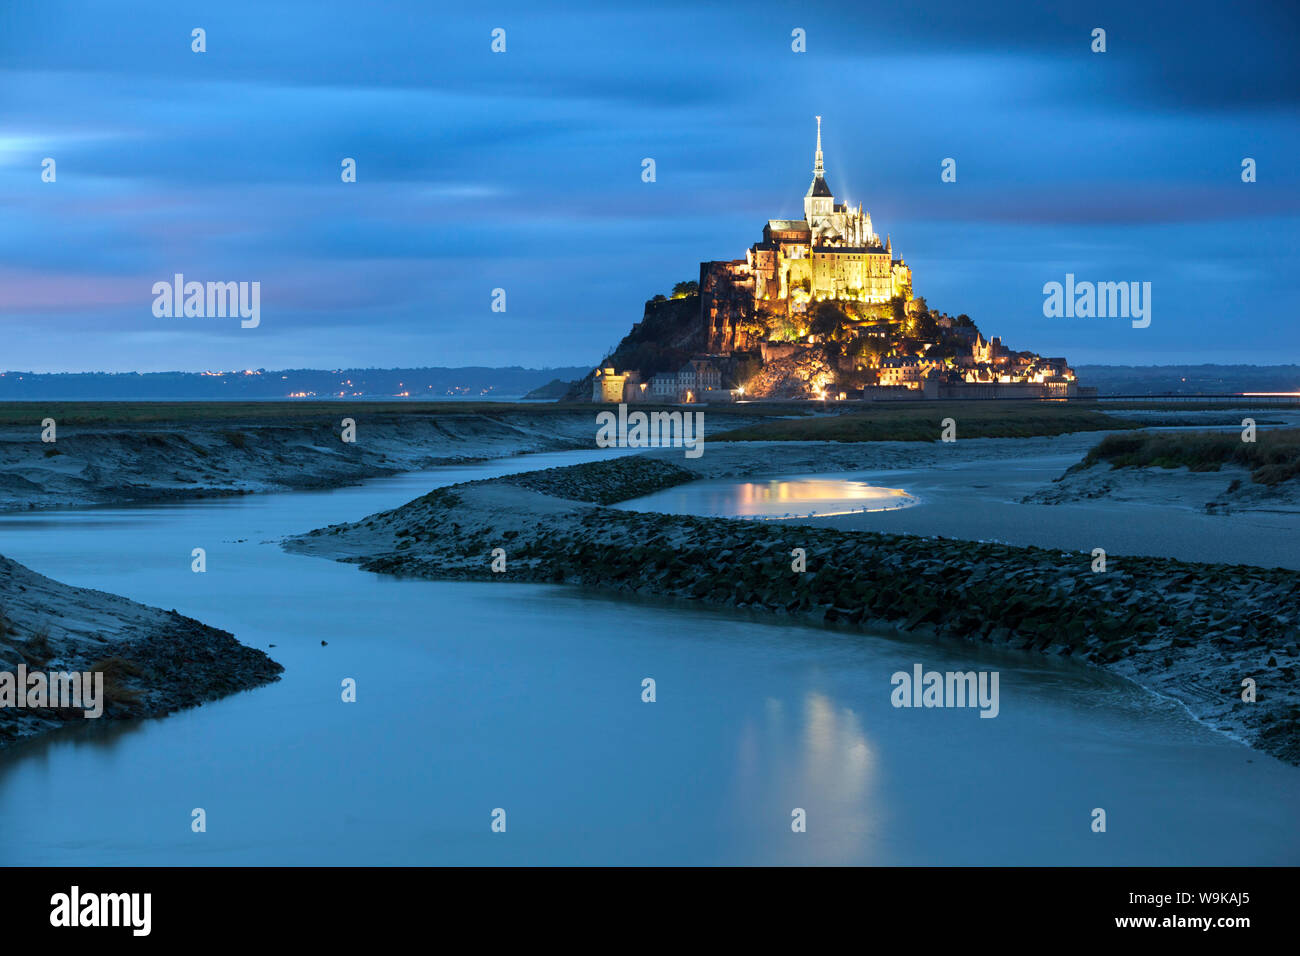 View along Couesnon to the Mont Saint-Michel from the Barrage at dusk, Mont Saint-Michel, UNESCO World Heritage Site, Normandy, France, Europe Stock Photo